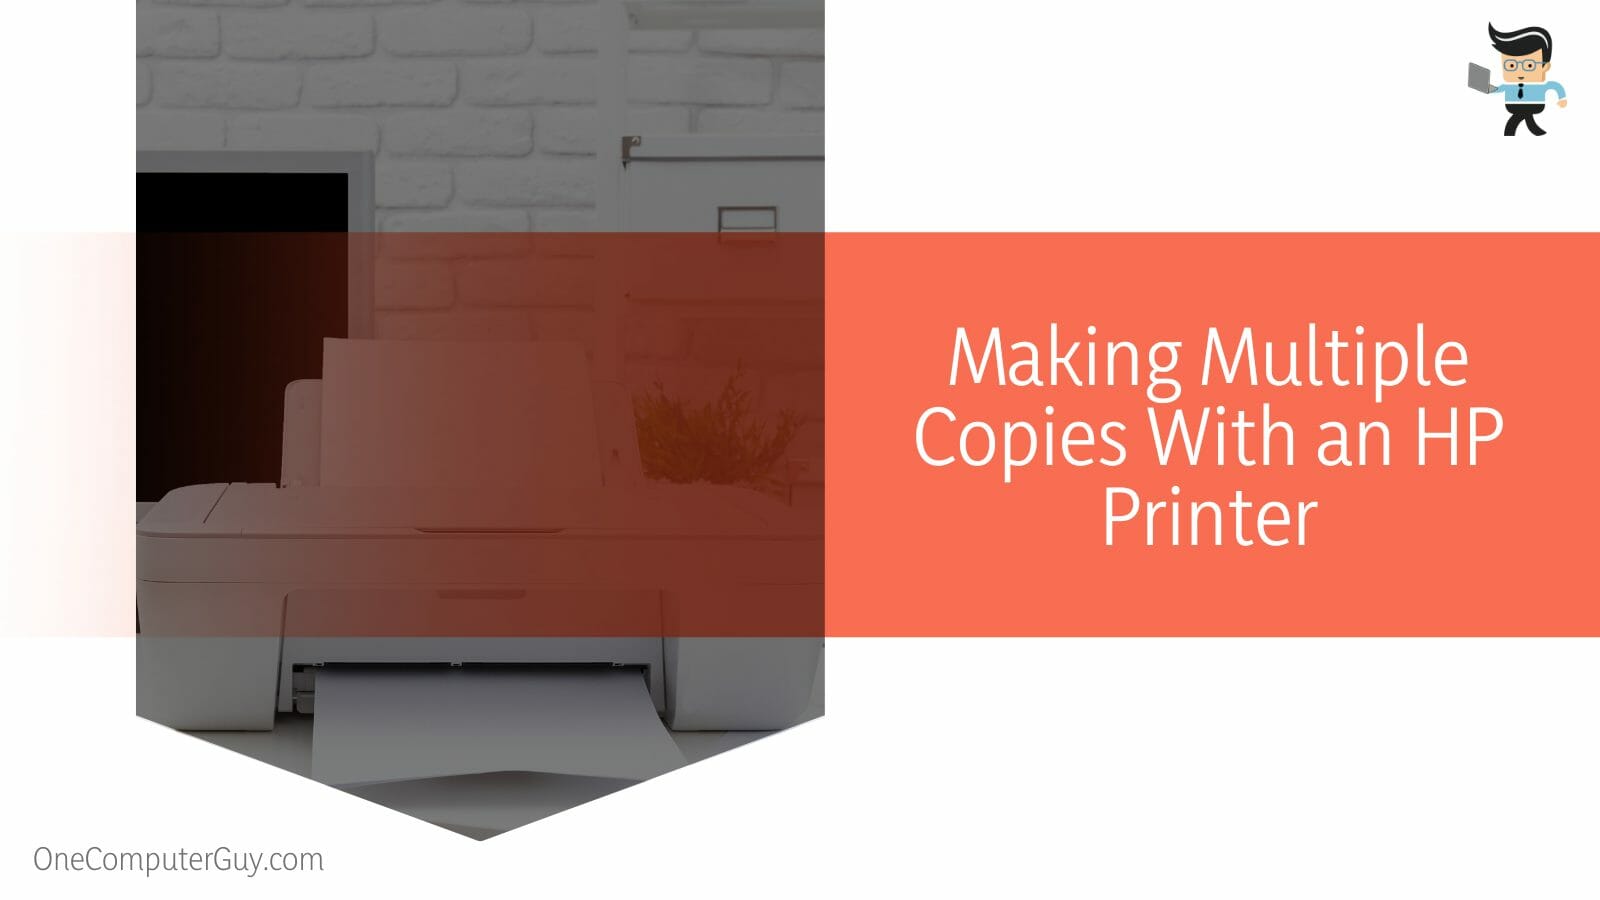 Making Multiple Copies With an HP Printer